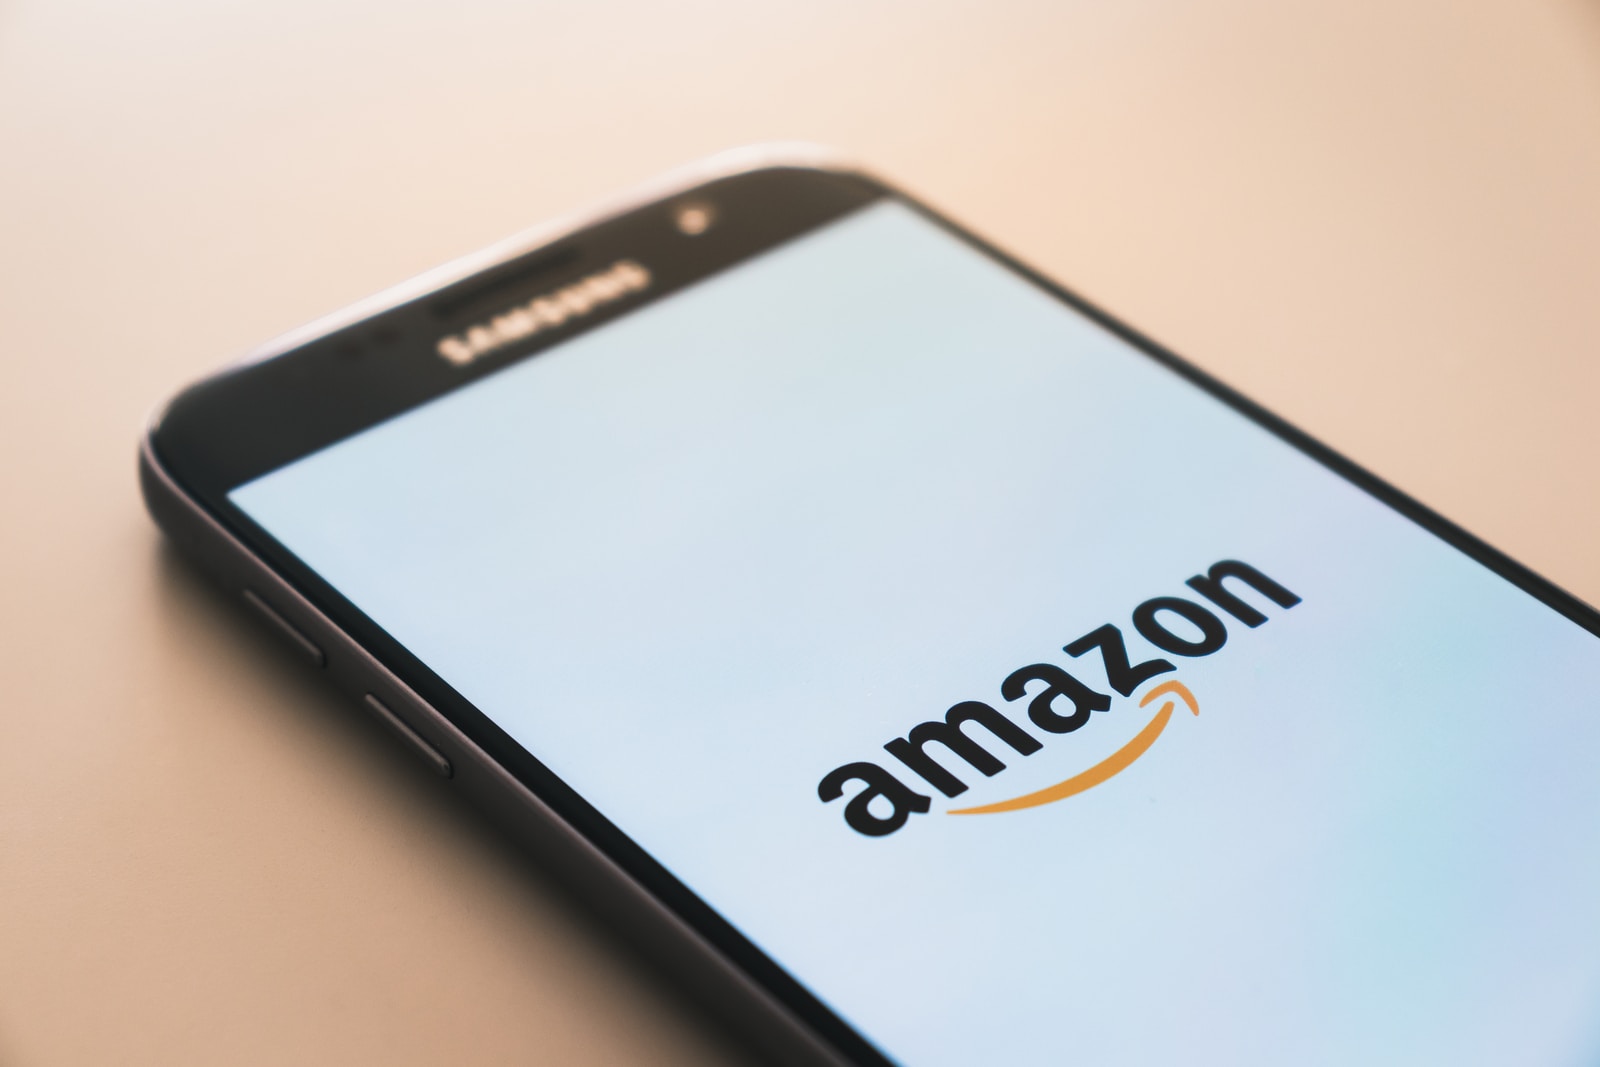 How to see next Lightning deals on Amazon